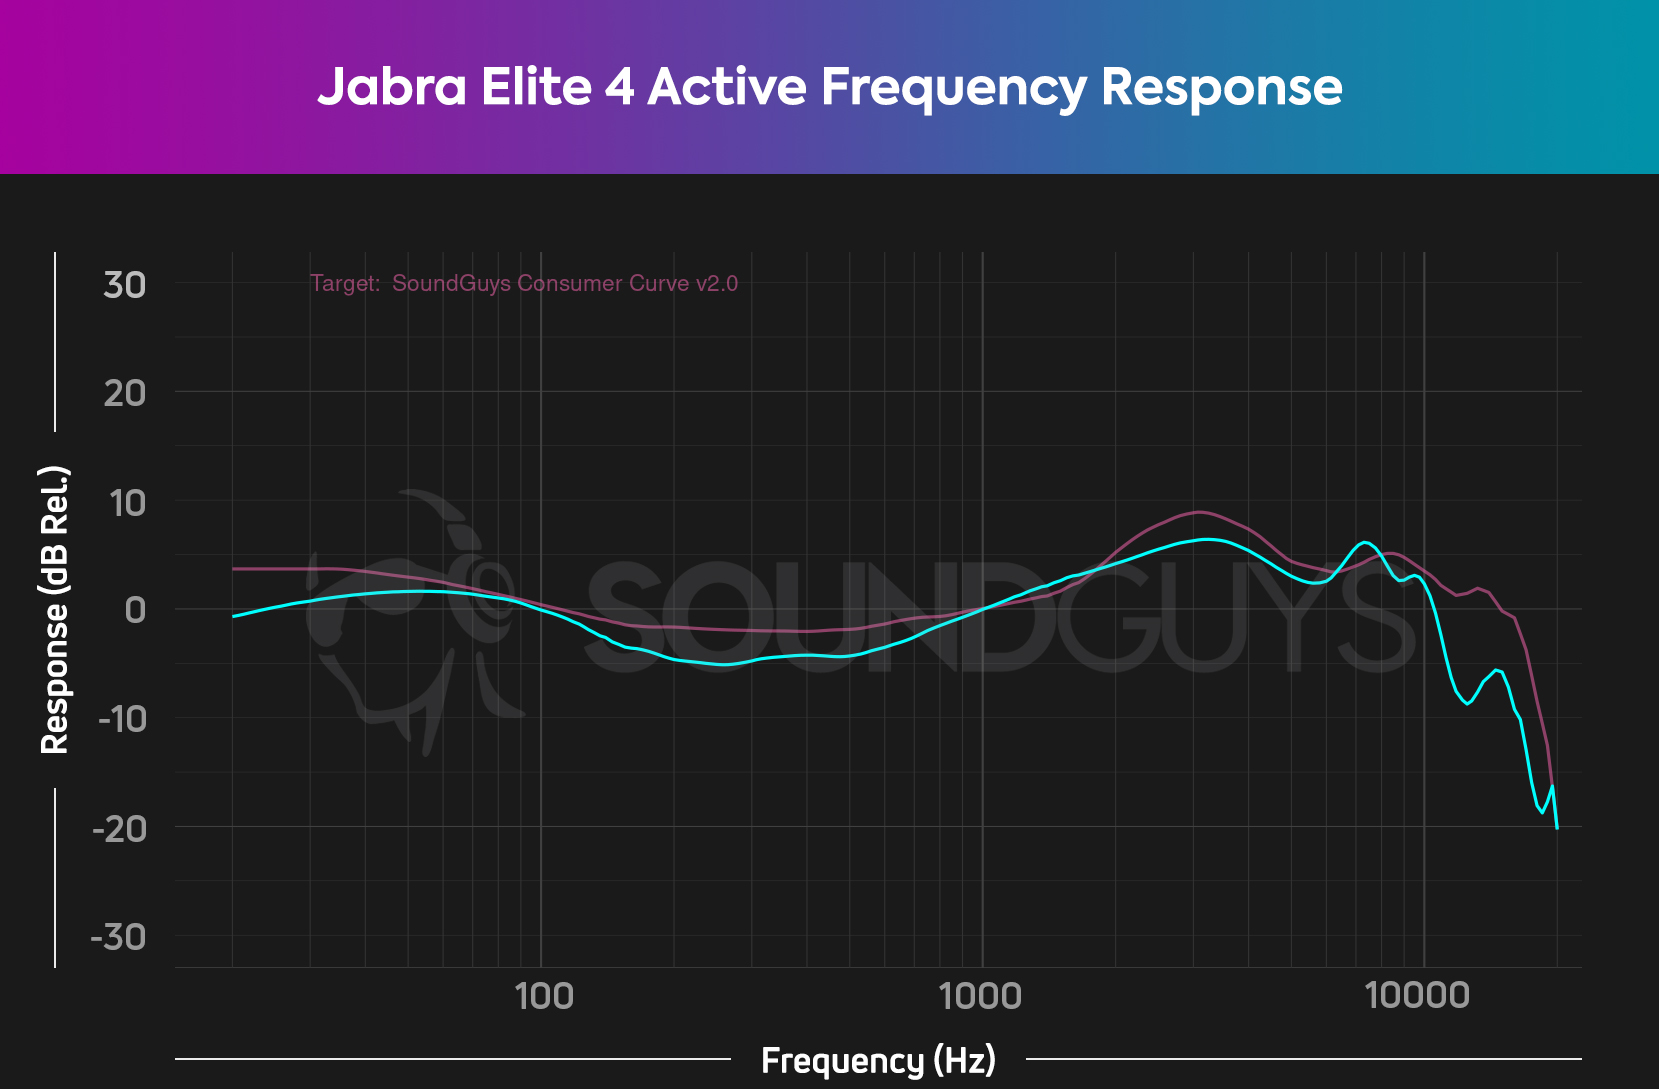 A chart shows the Jabra Elite 4 Active frequency response with a slight dip from 200-600Hz.